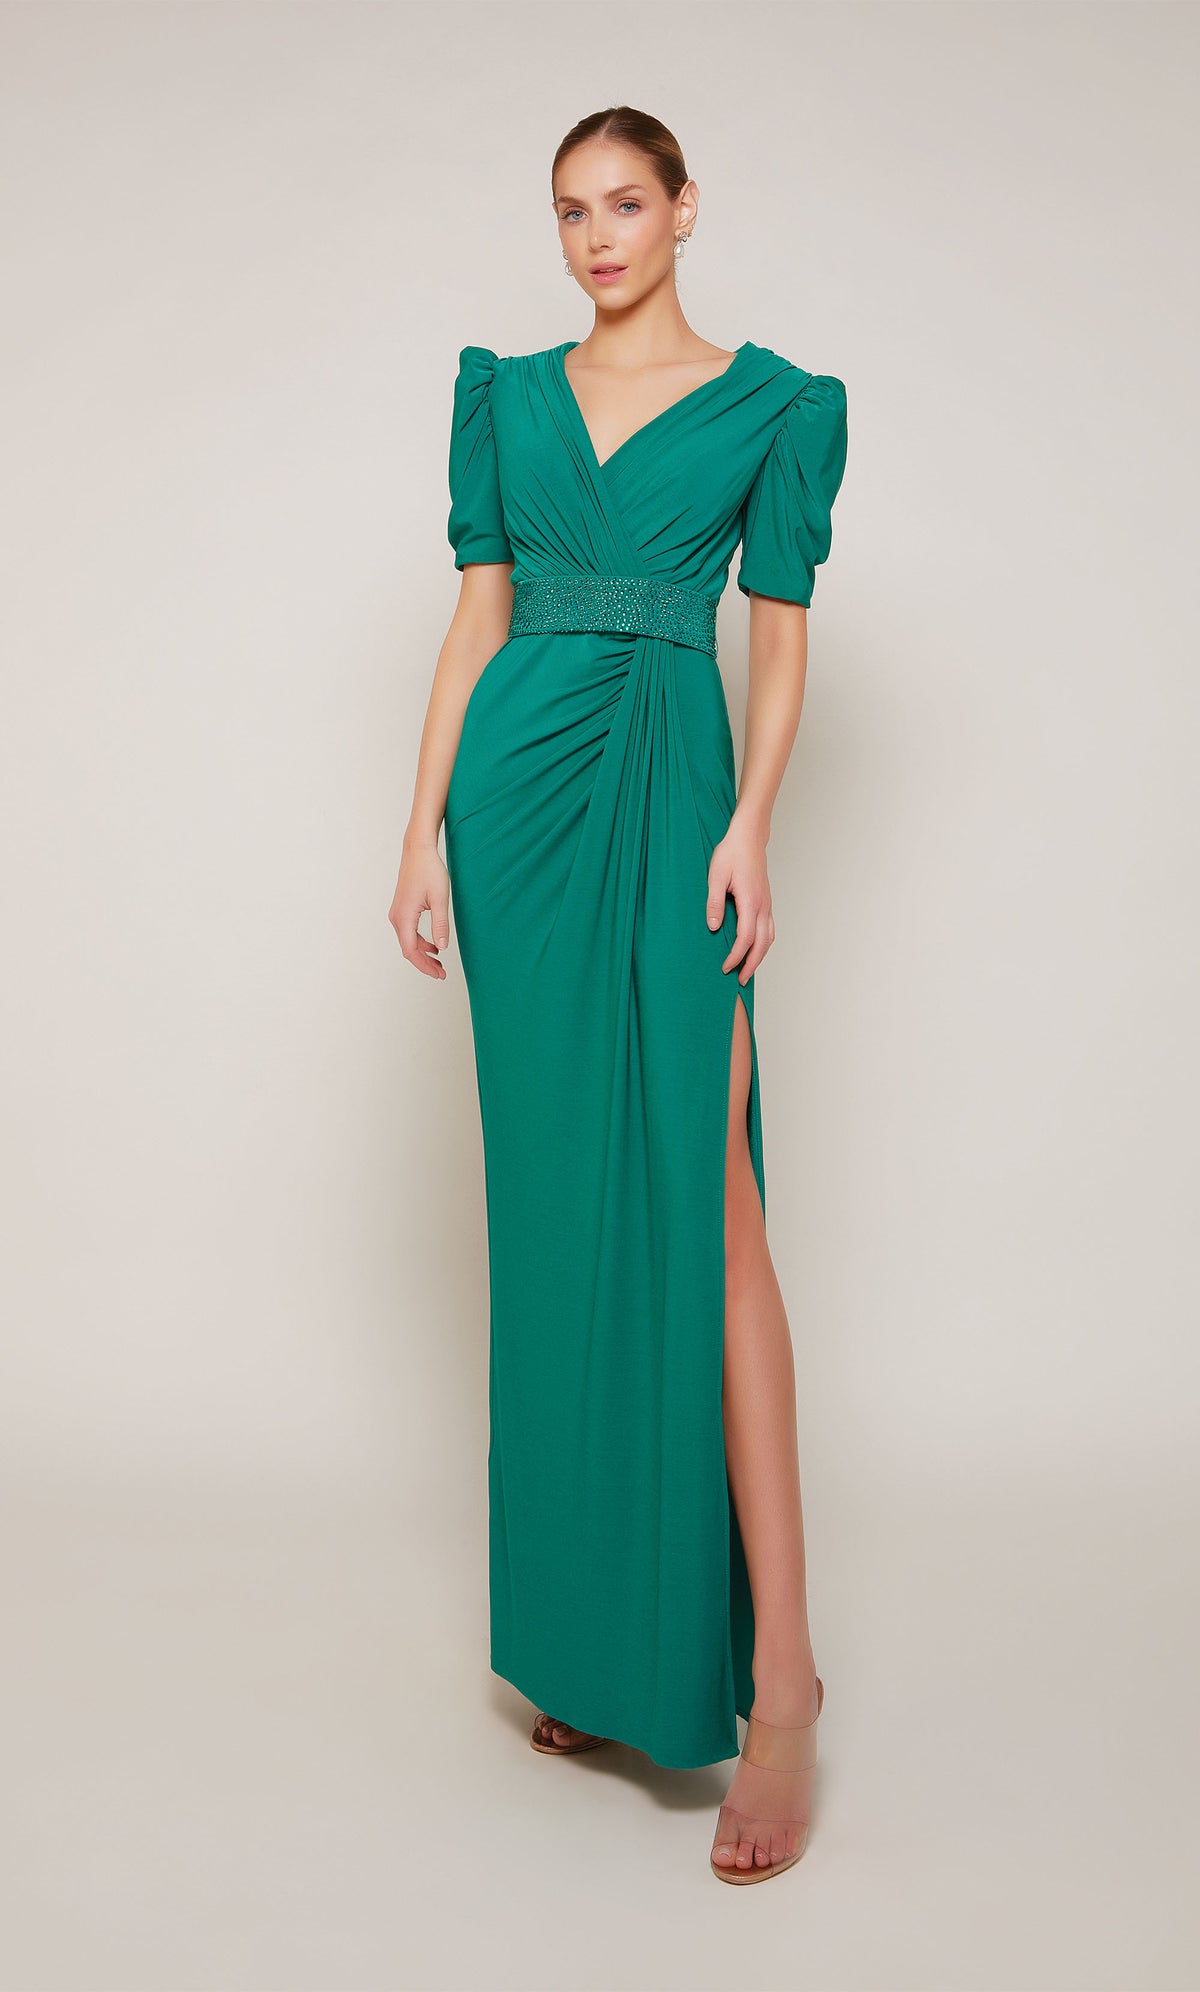 An emerald evening gown with puff sleeves, a V-neckline, an embellished belt, and elegant side slit.